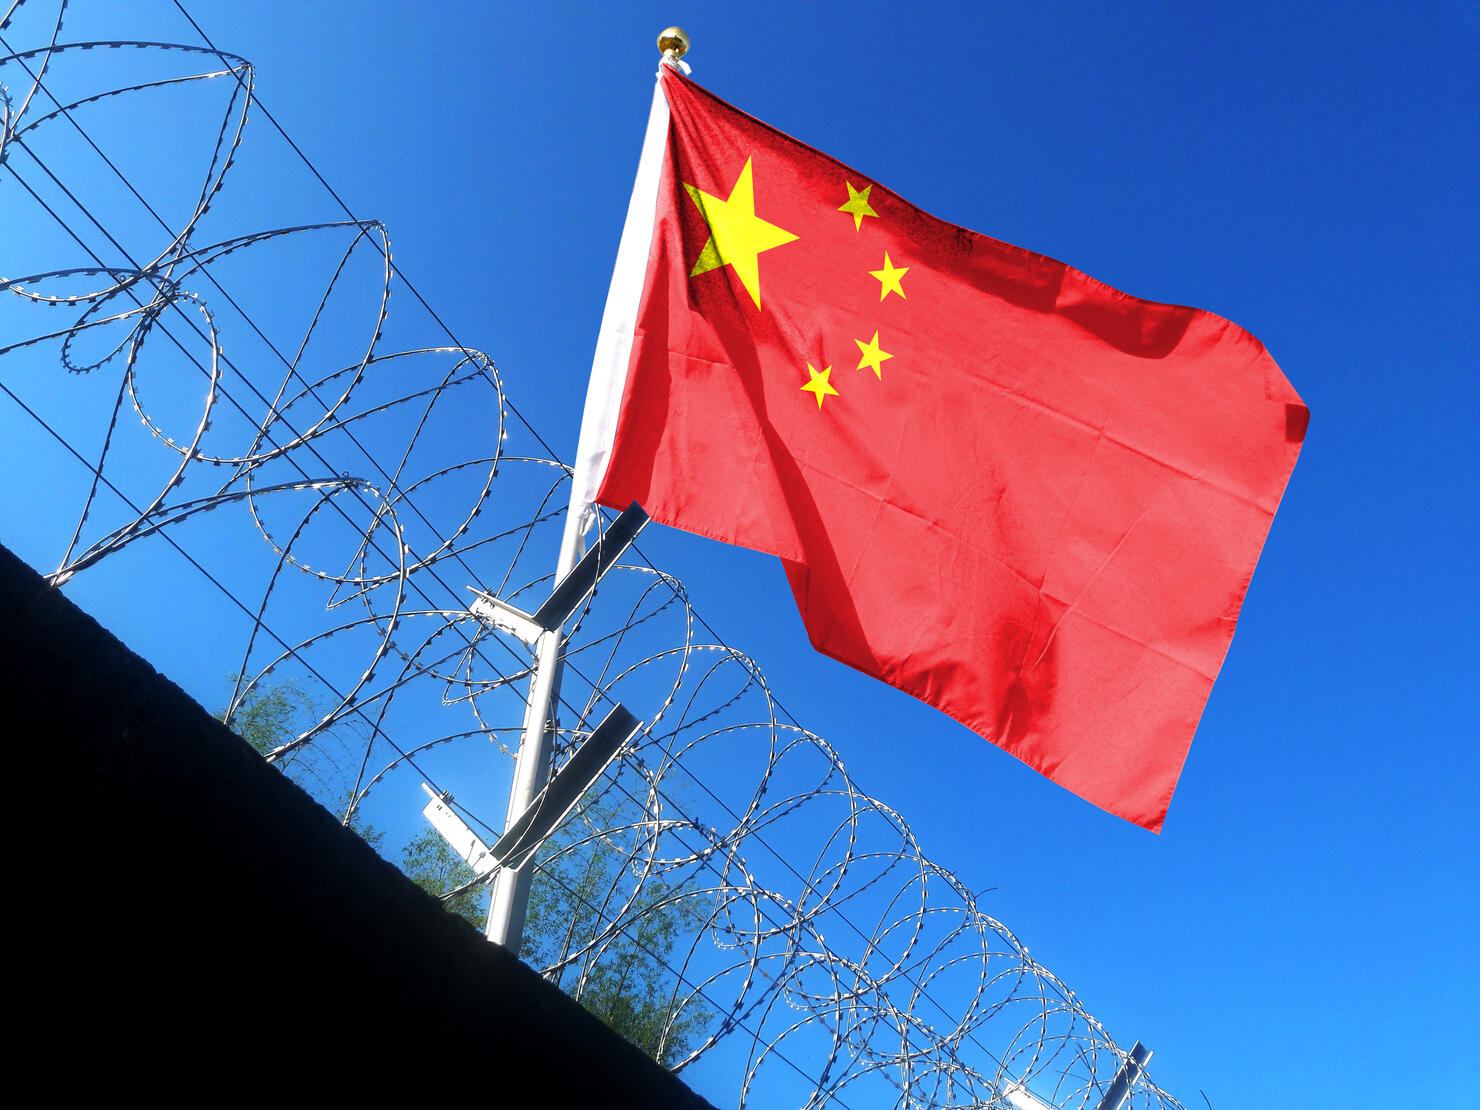 The Chinese flag hangs in the cloudy sky outside the prison's barbed wire. waving in the sky